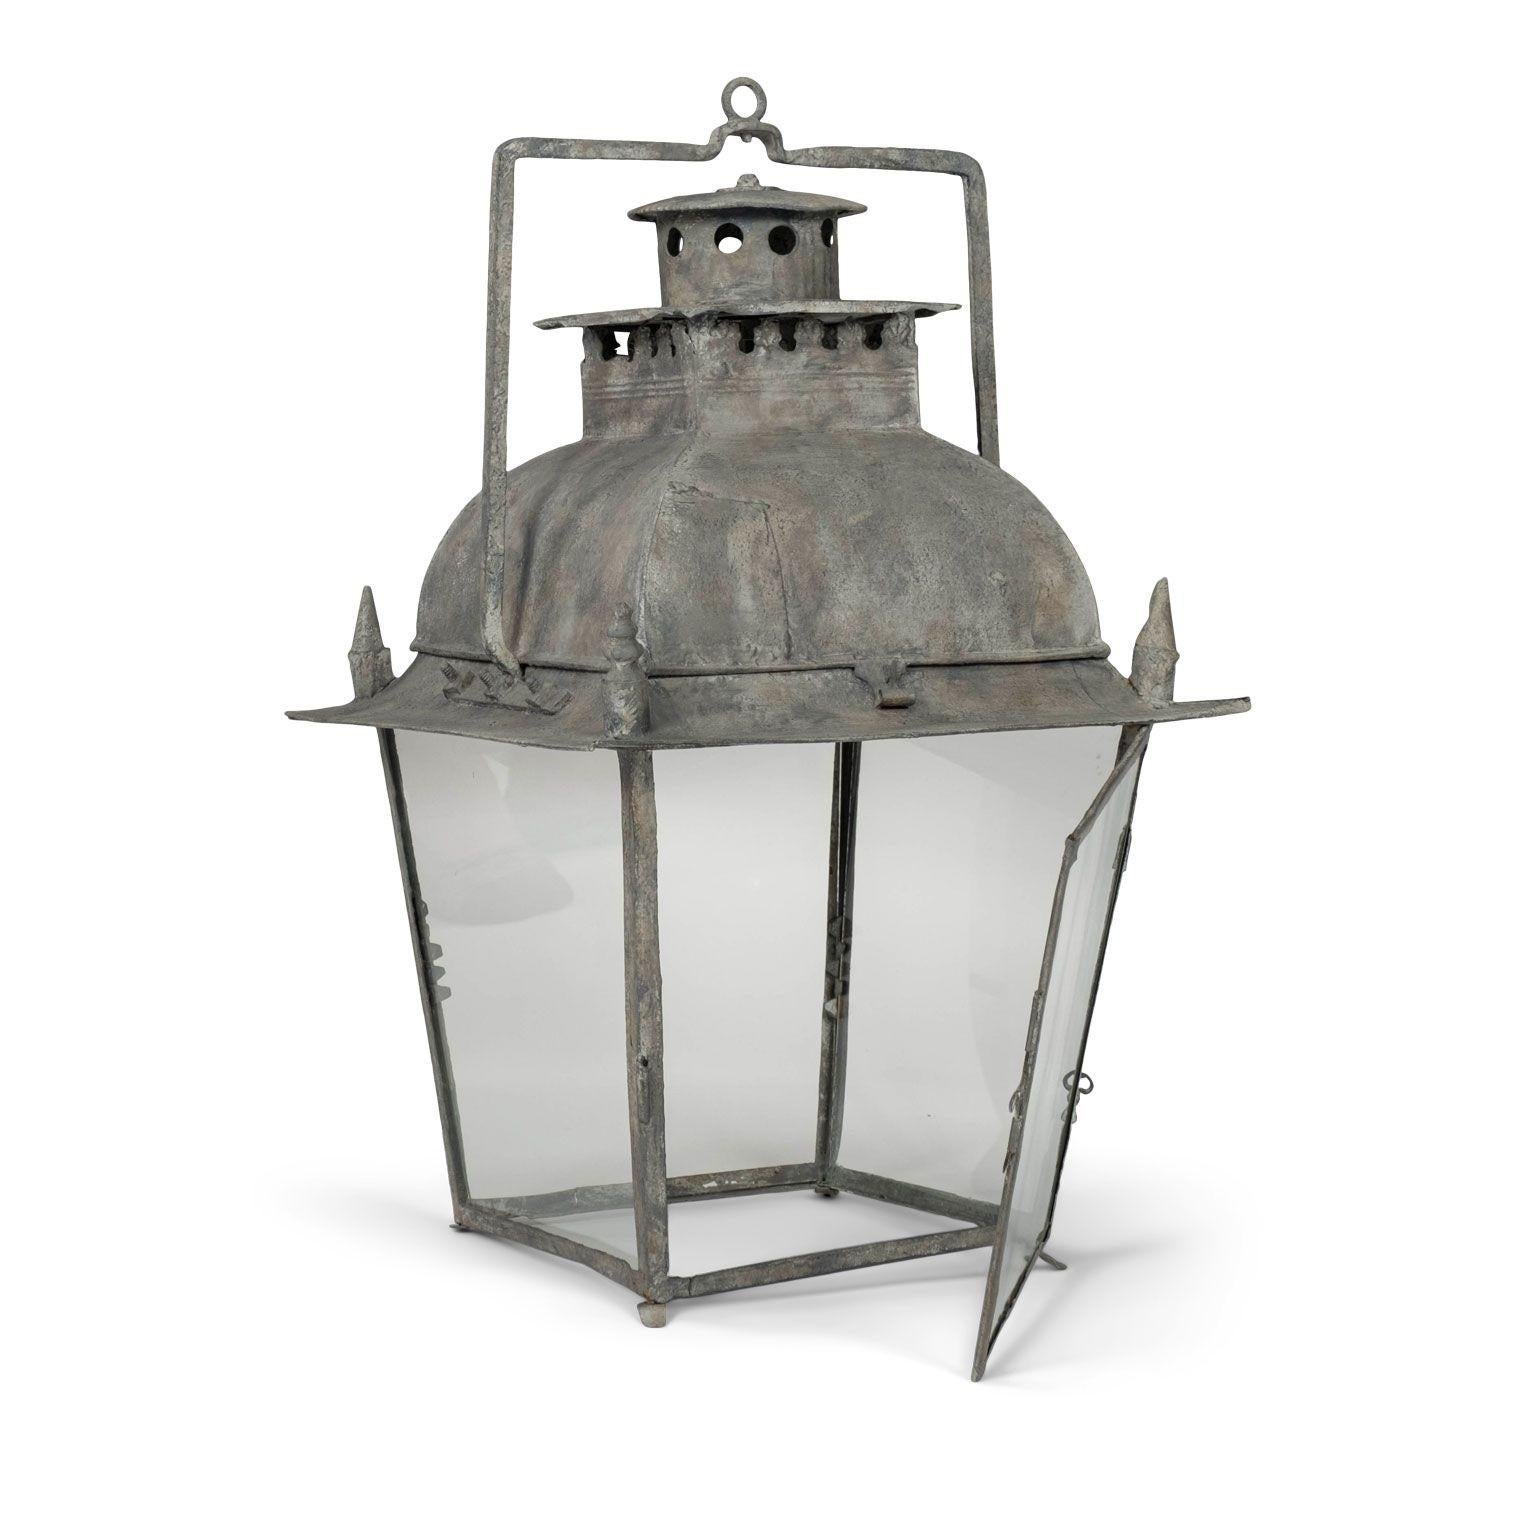 French tole and glass lantern dating to 19th century. Four-sided iron frame, tole top and glass paneled sides. Not wired for electricity, but can be wired, or fitted for usage with gas, for an additional cost. Includes chain and canopy (listed